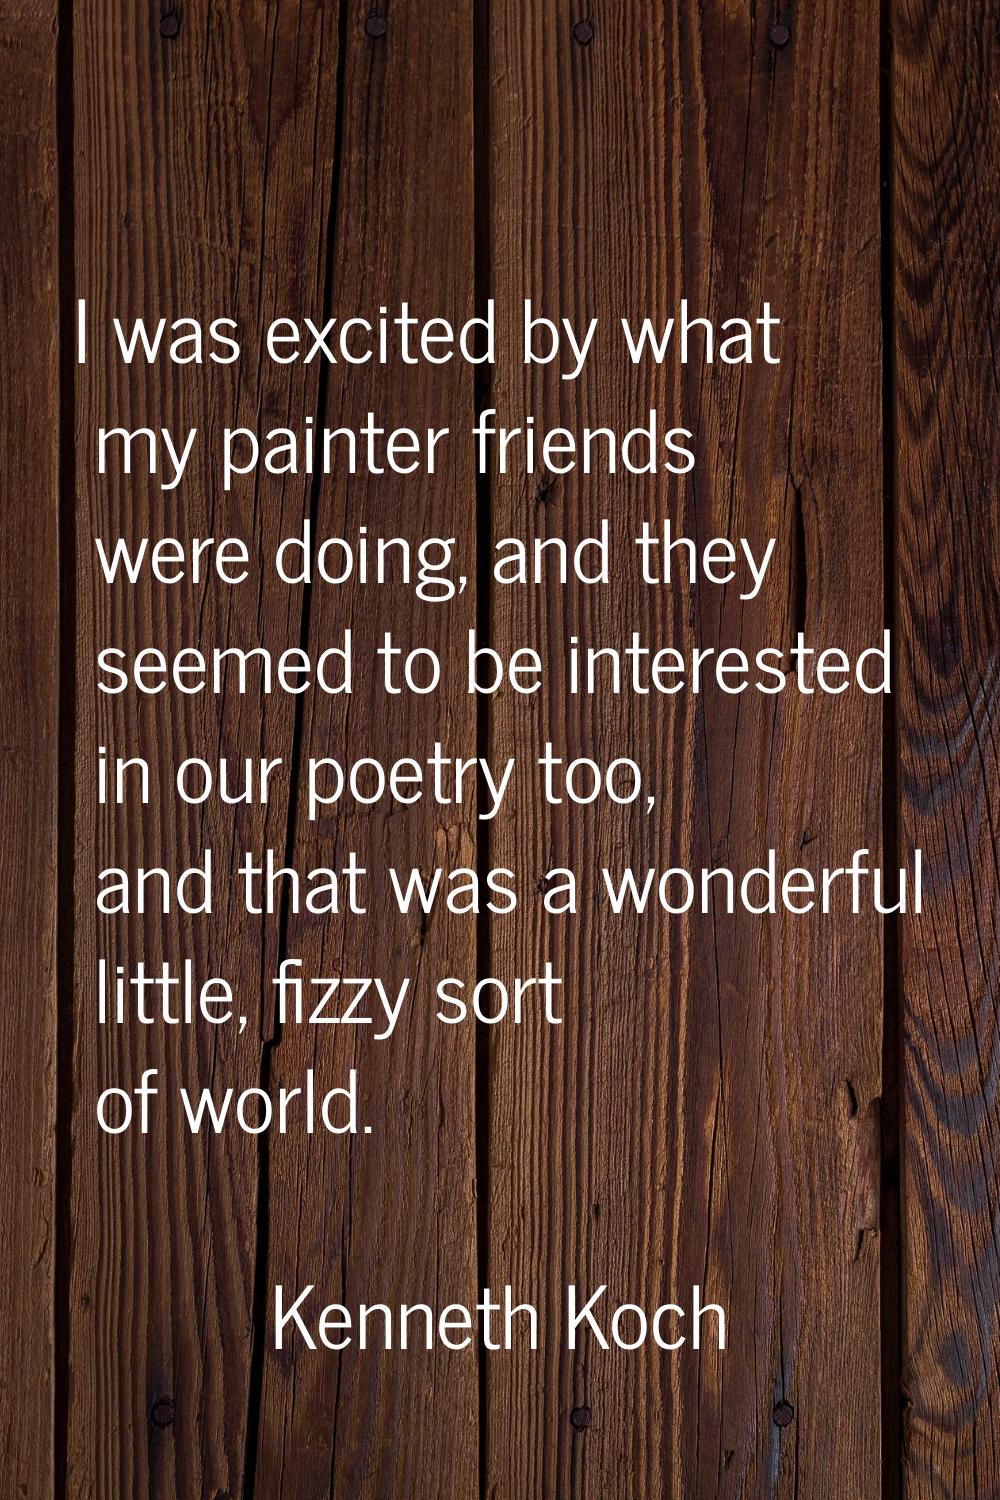 I was excited by what my painter friends were doing, and they seemed to be interested in our poetry